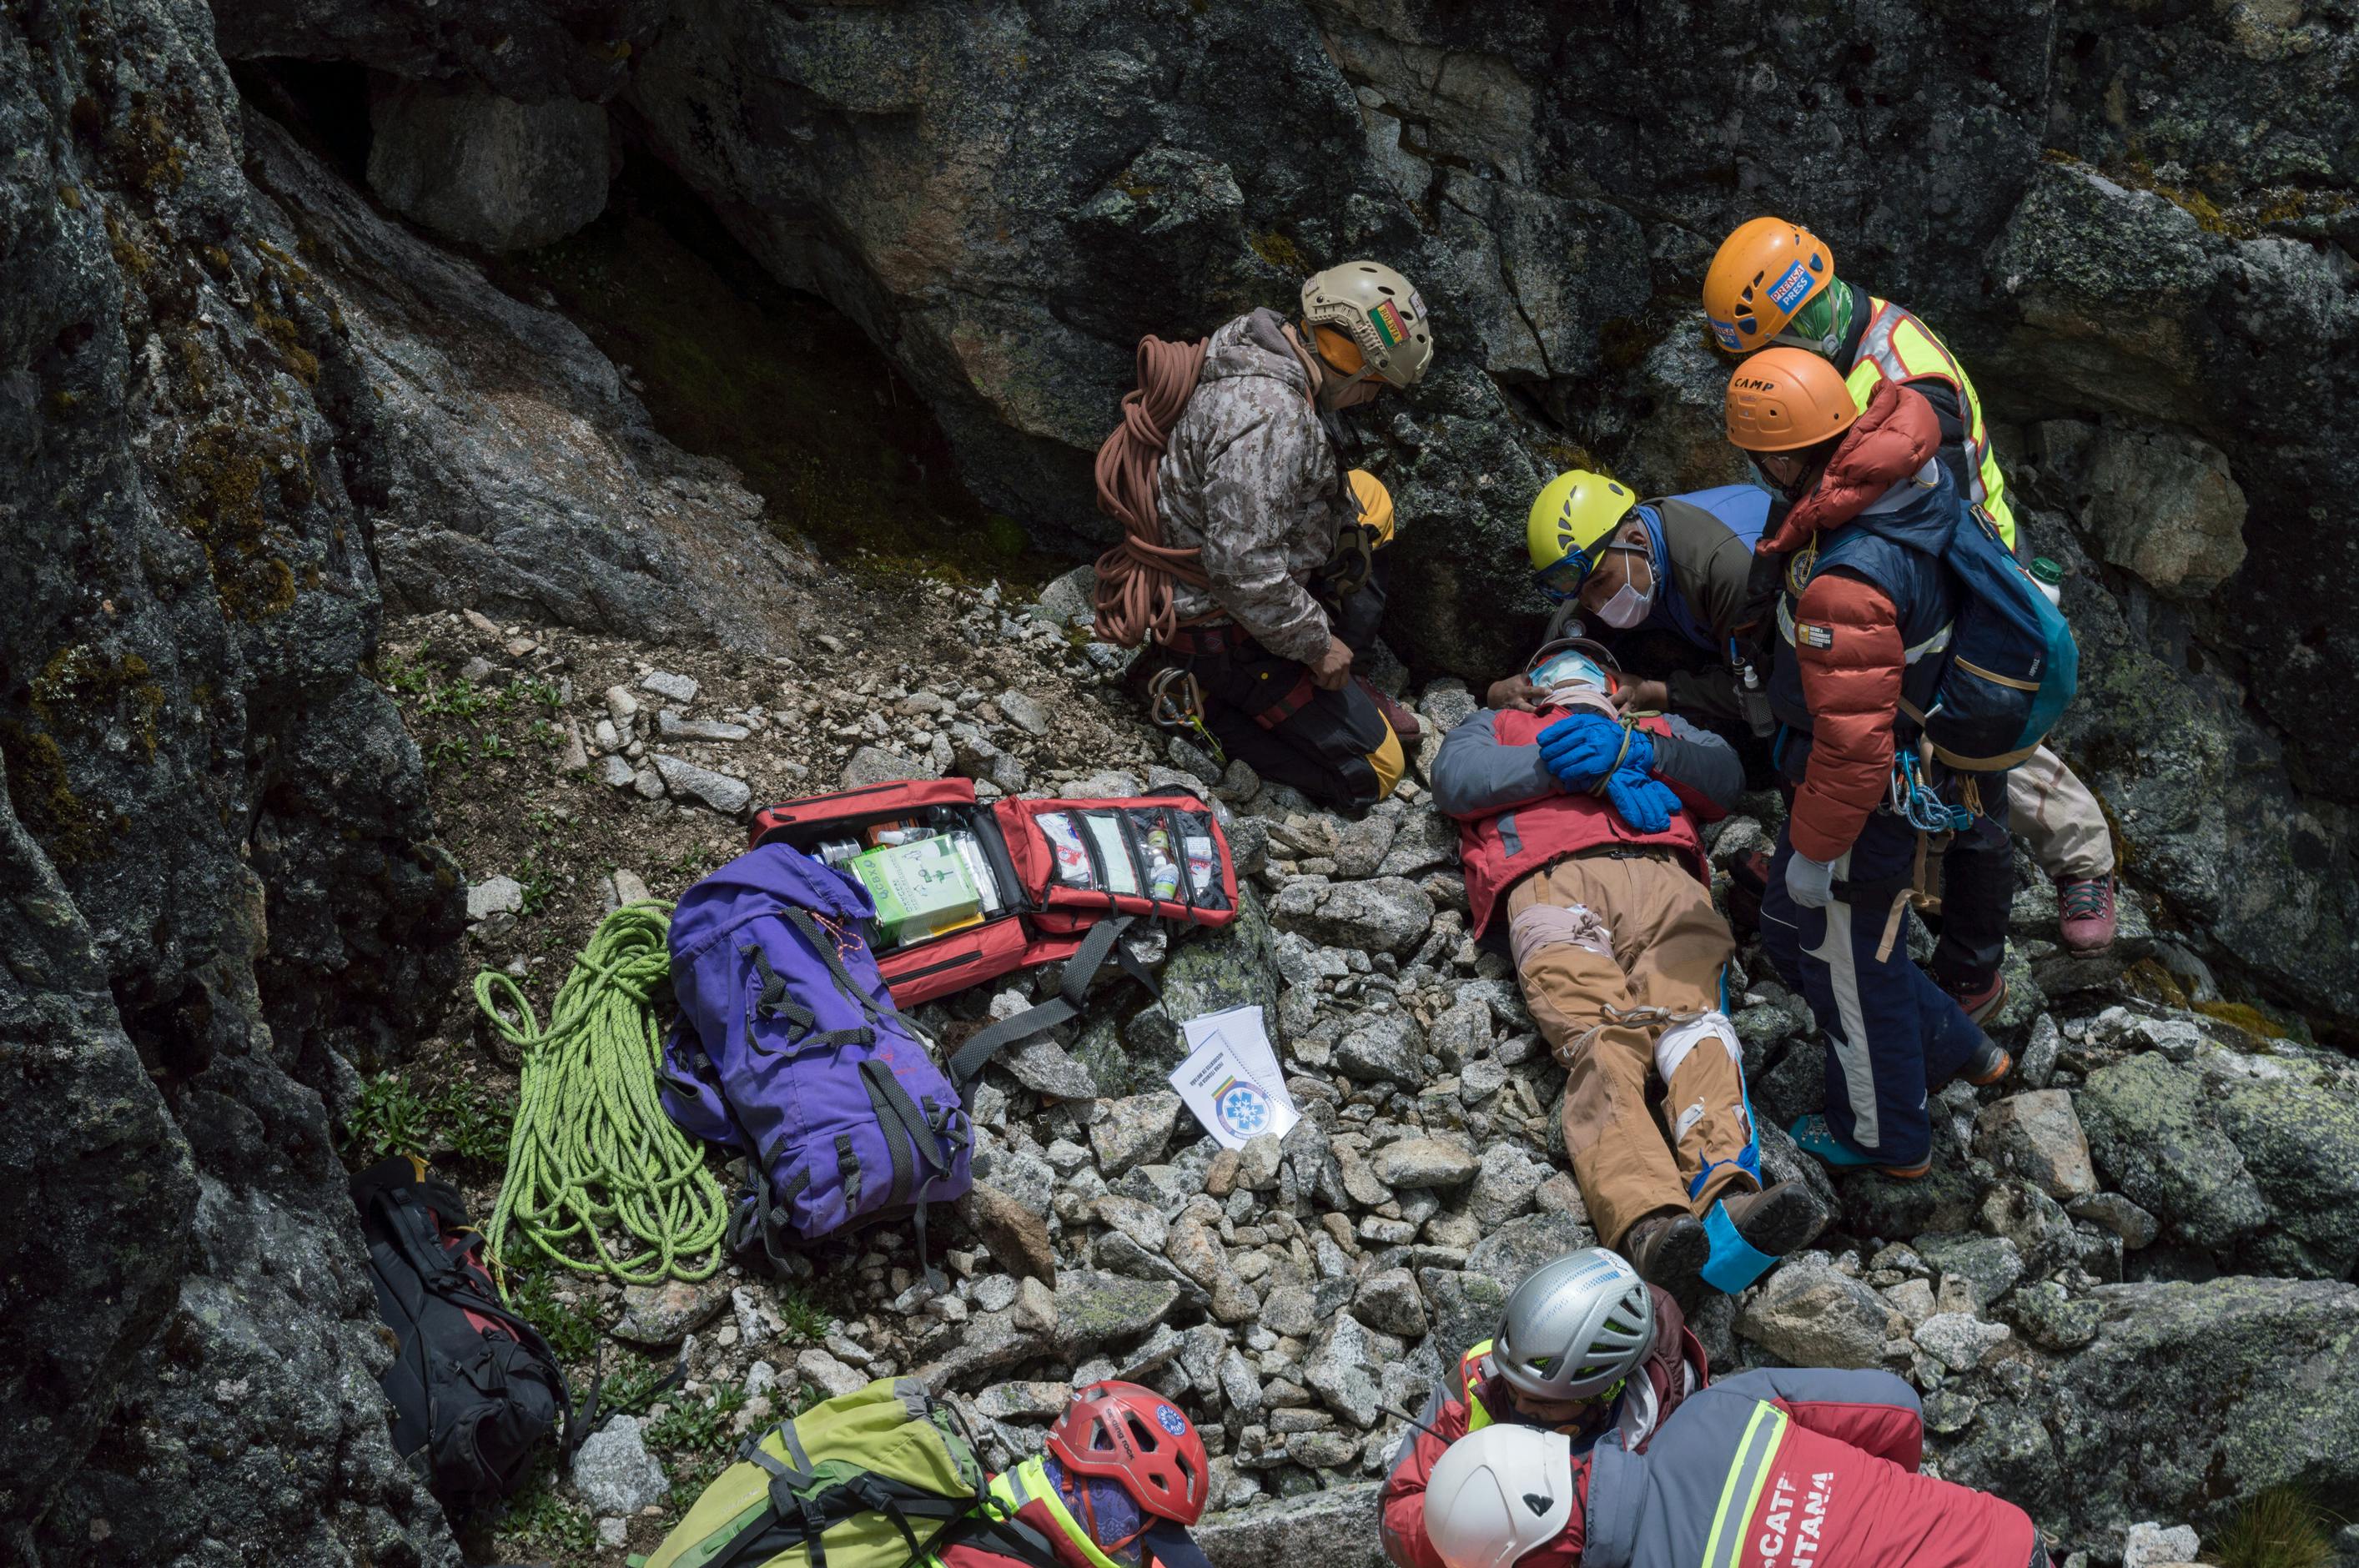 When Disaster Strikes: Inside the Vital Role of Urban Search and Rescue in Emergency Response